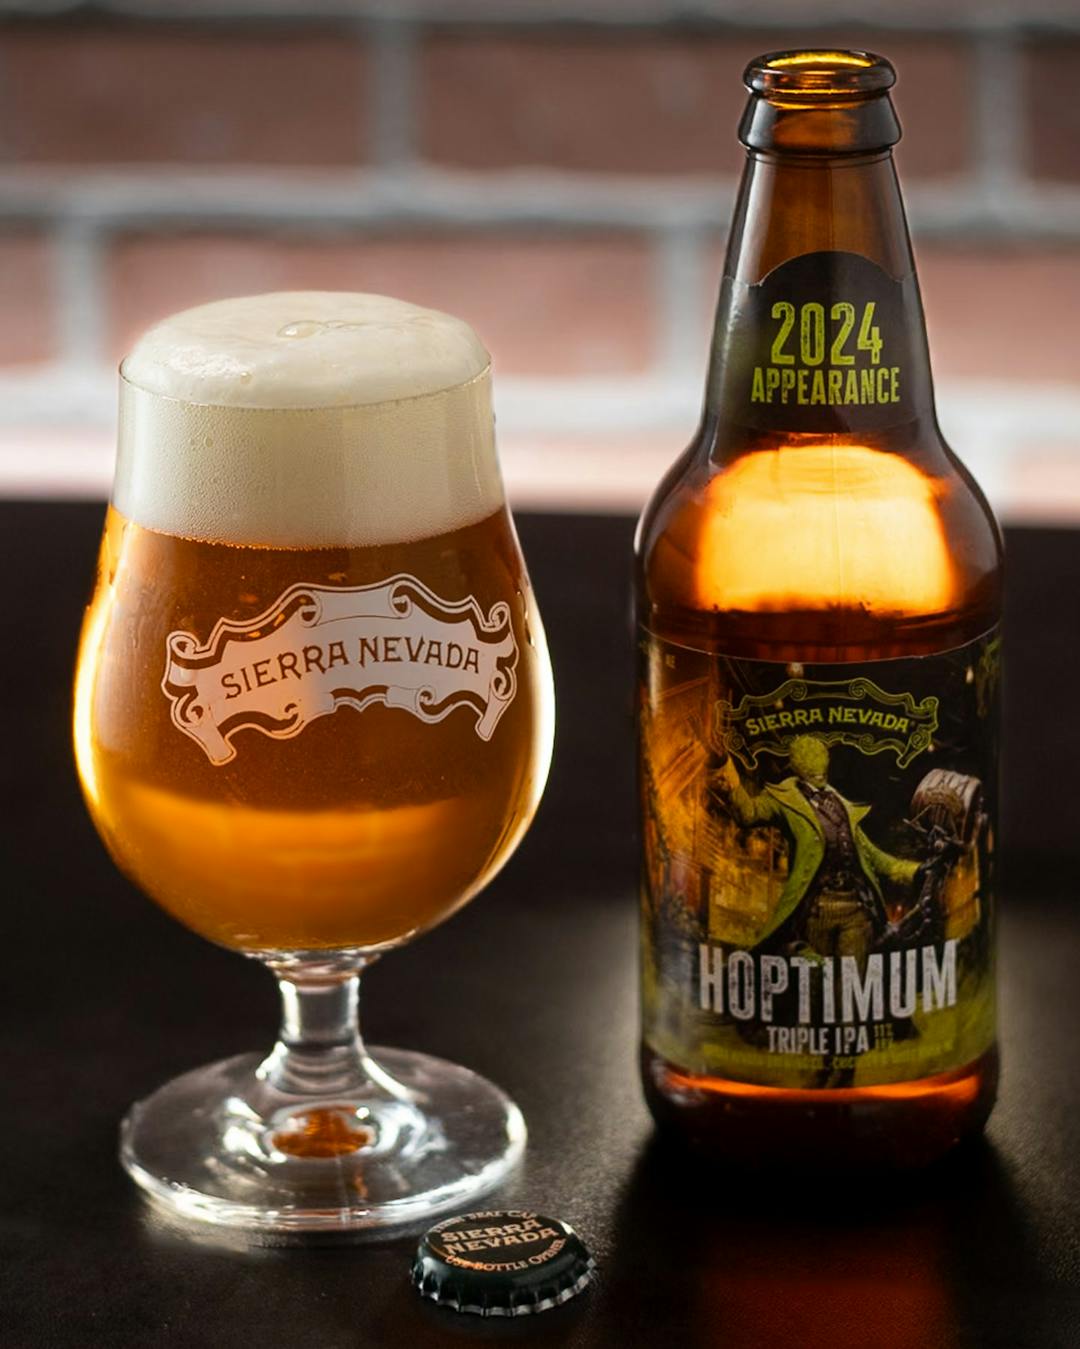 A full glass and a bottle of Hoptimum Triple IPA on a dark table with a bottle cap in the foreground